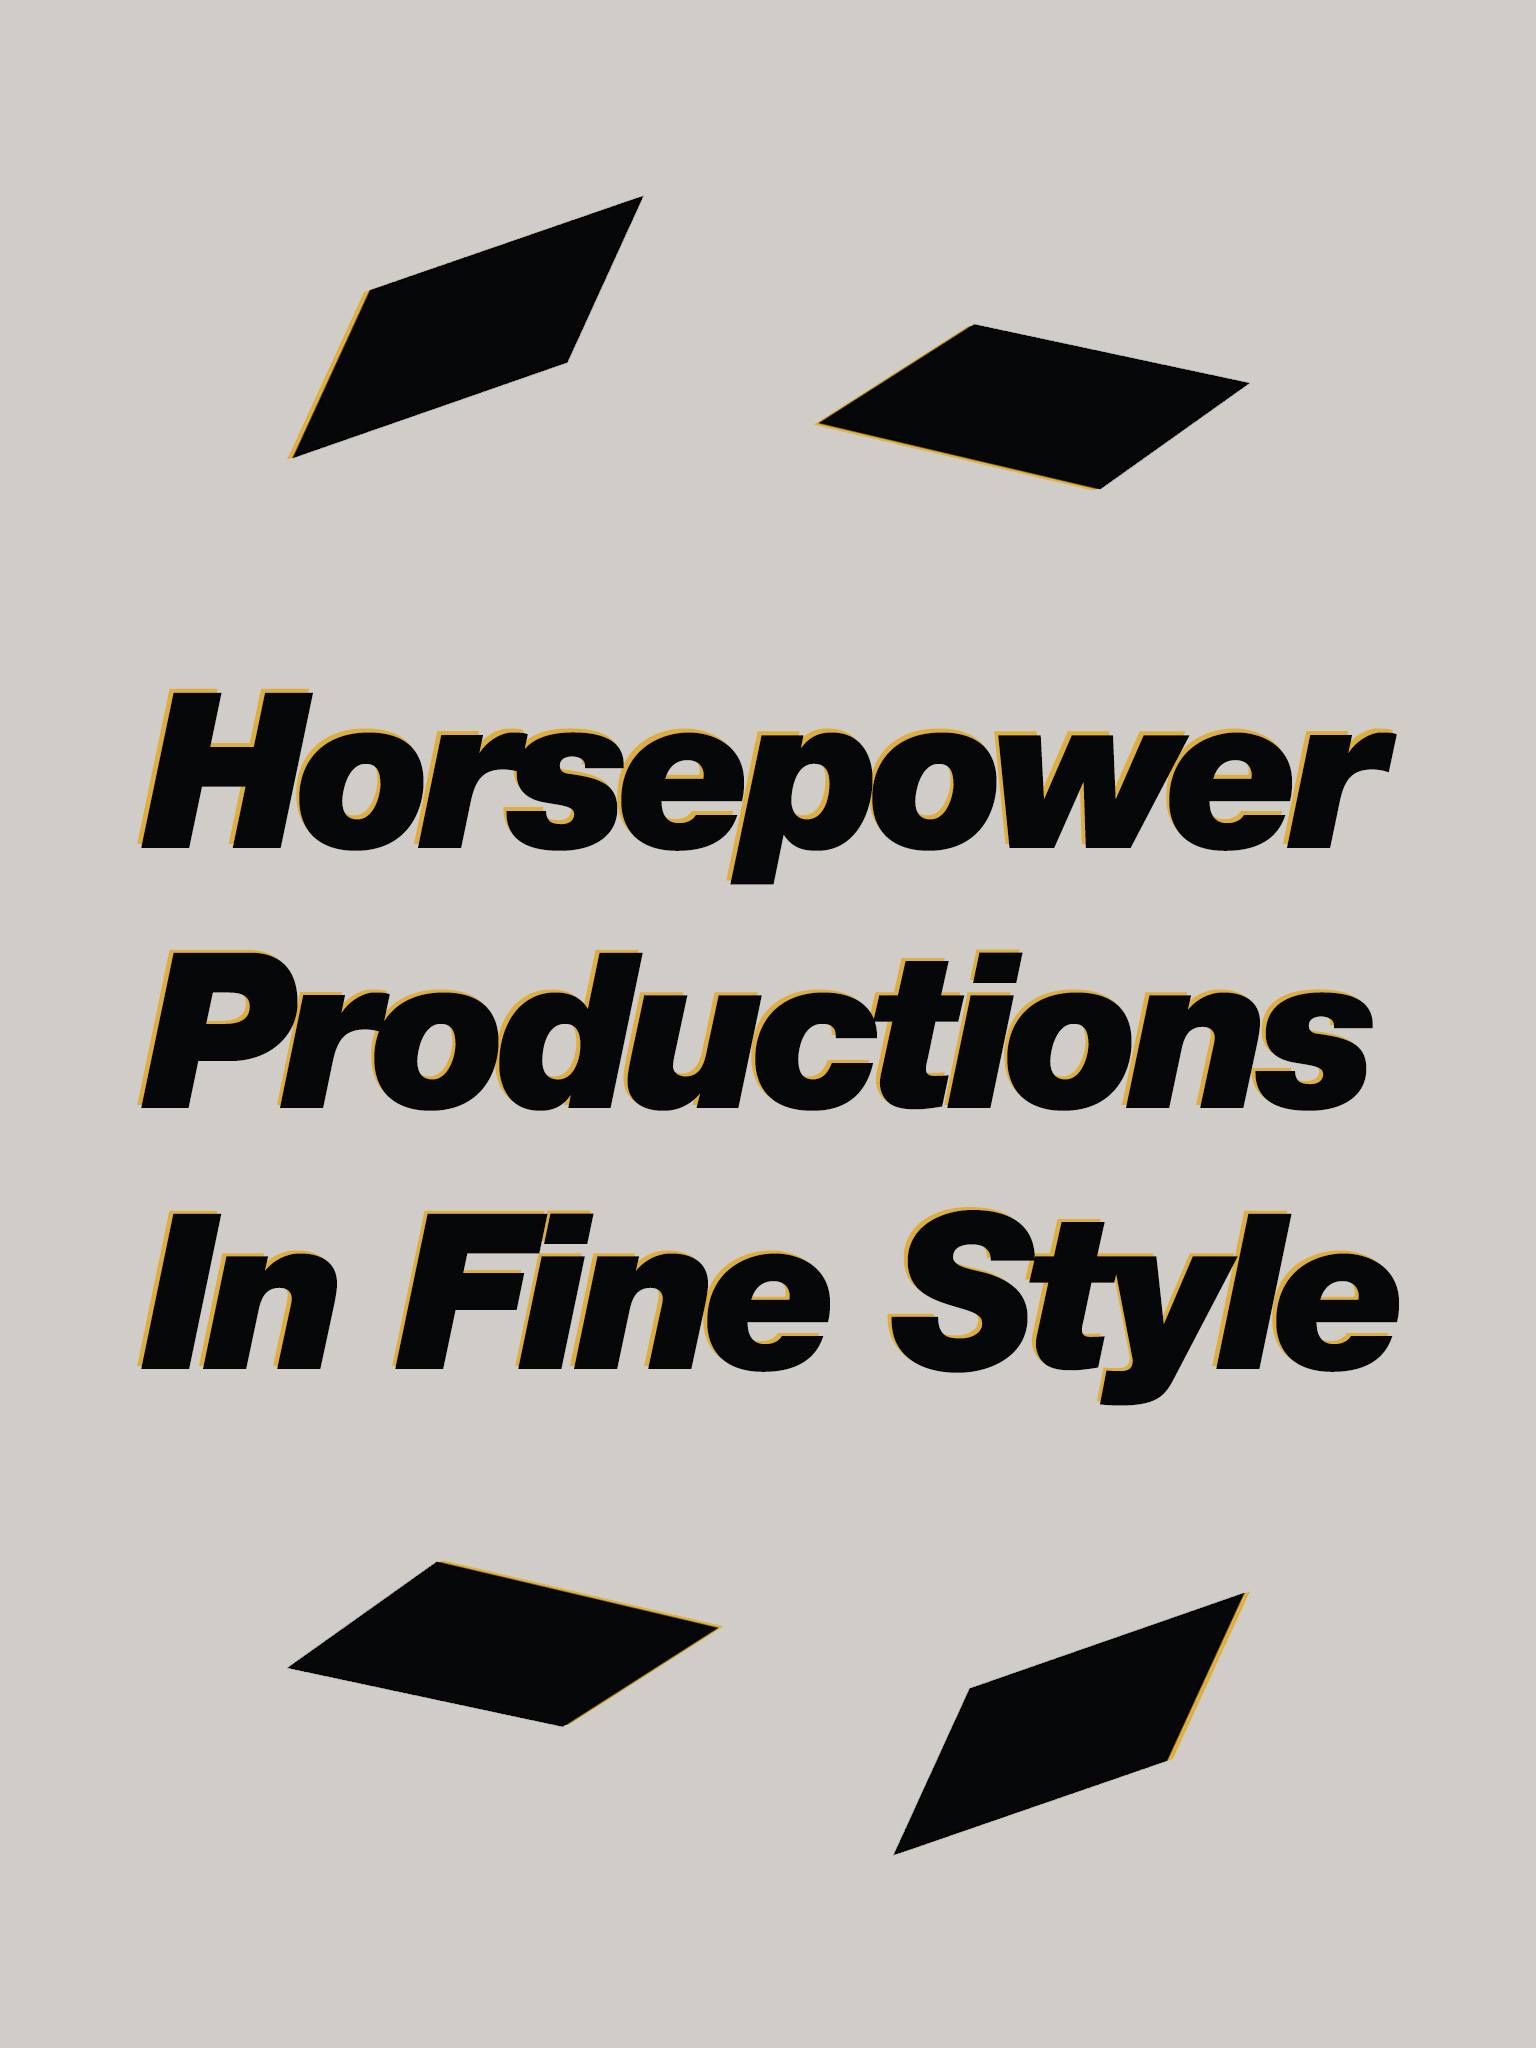 Horsepower Productions: In fine style